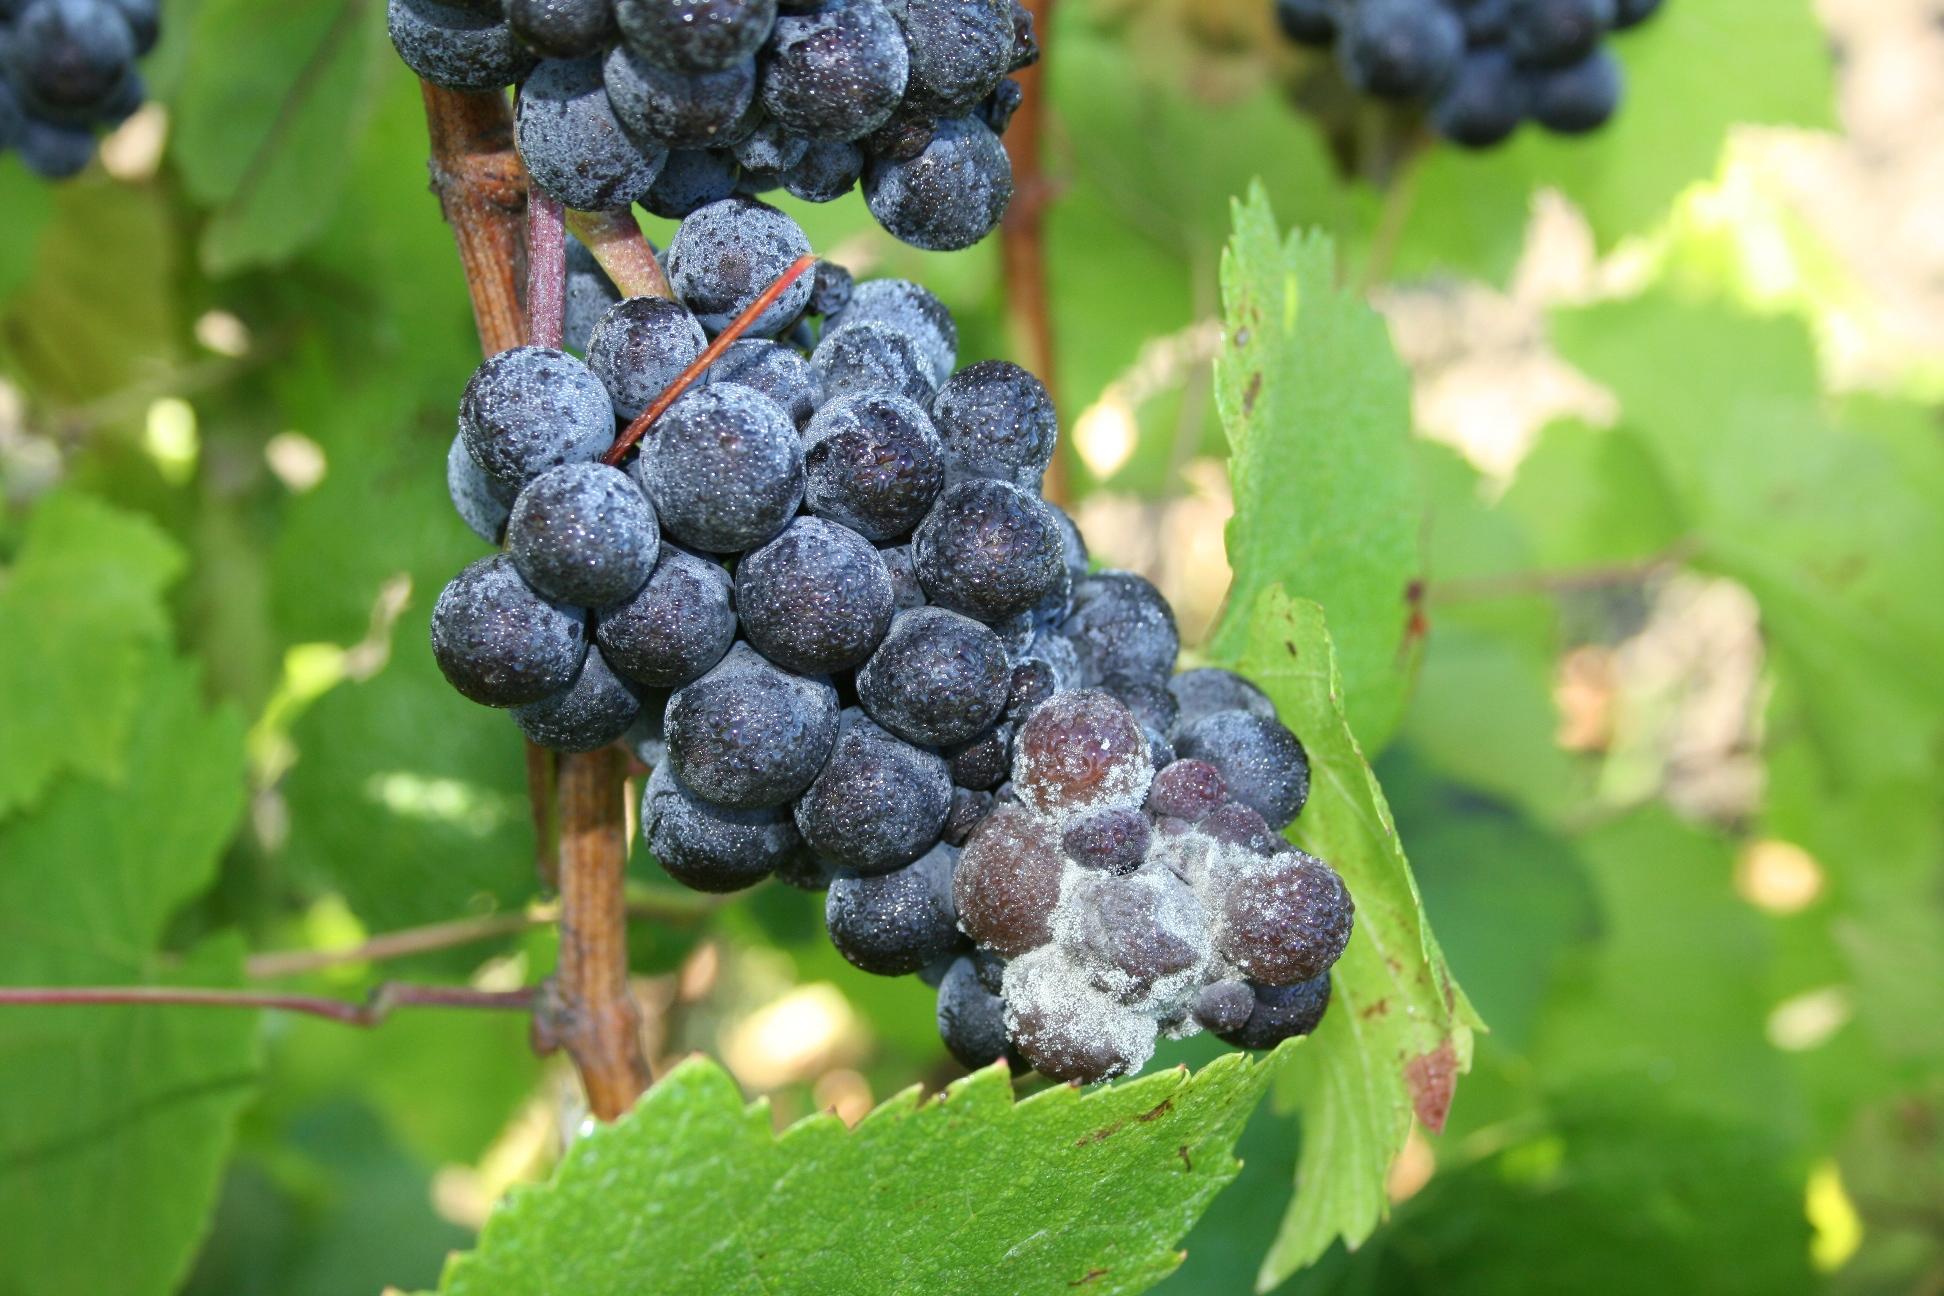 A cluster of dark grapes on the vine with Botrytis fungus infecting the lower part.